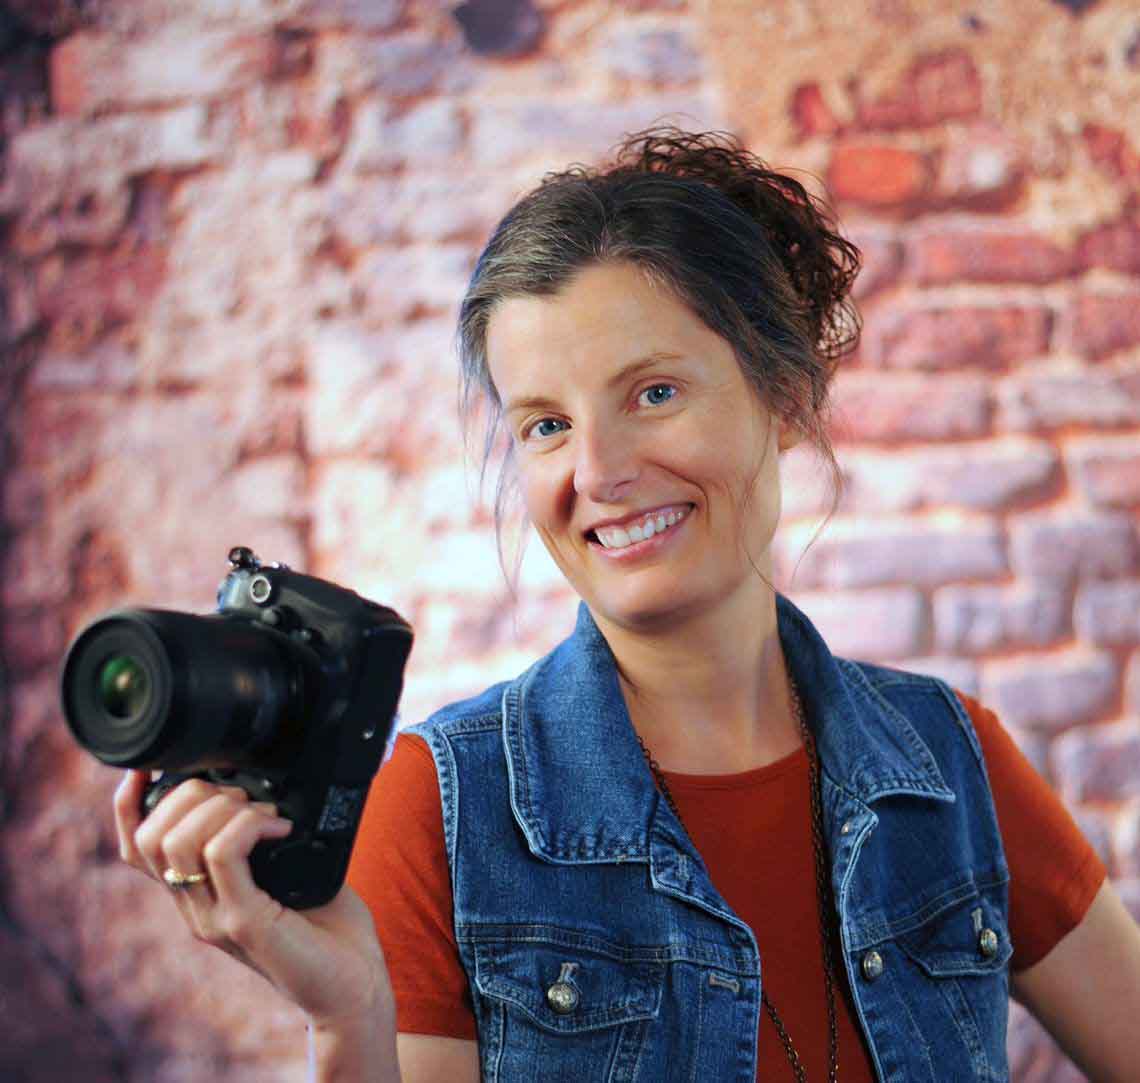 Stay at Home Mom With a Photography Hobby Turned Her Photography Side Gig Into $3,000 Orders